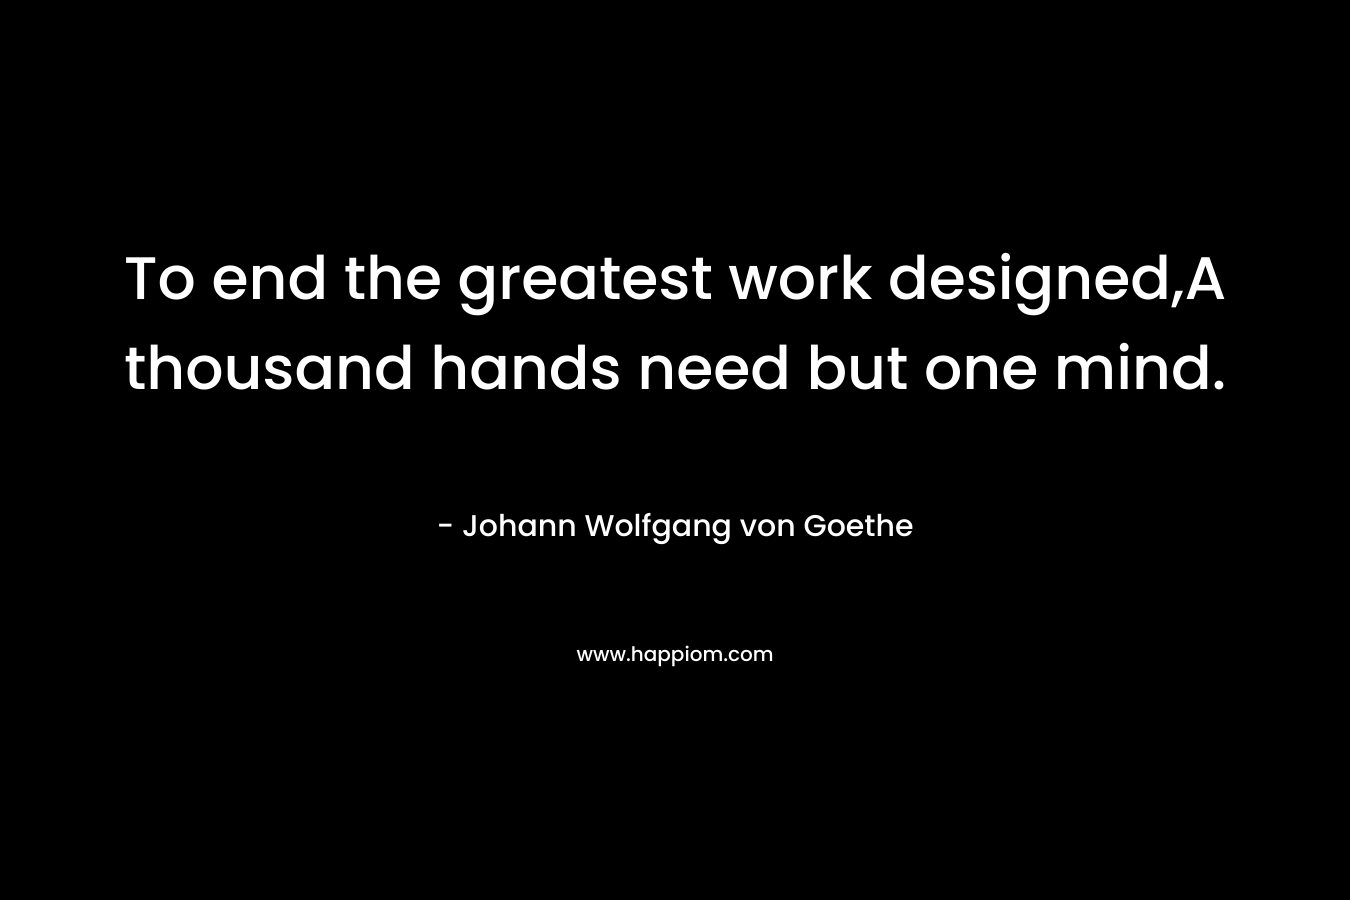 To end the greatest work designed,A thousand hands need but one mind.